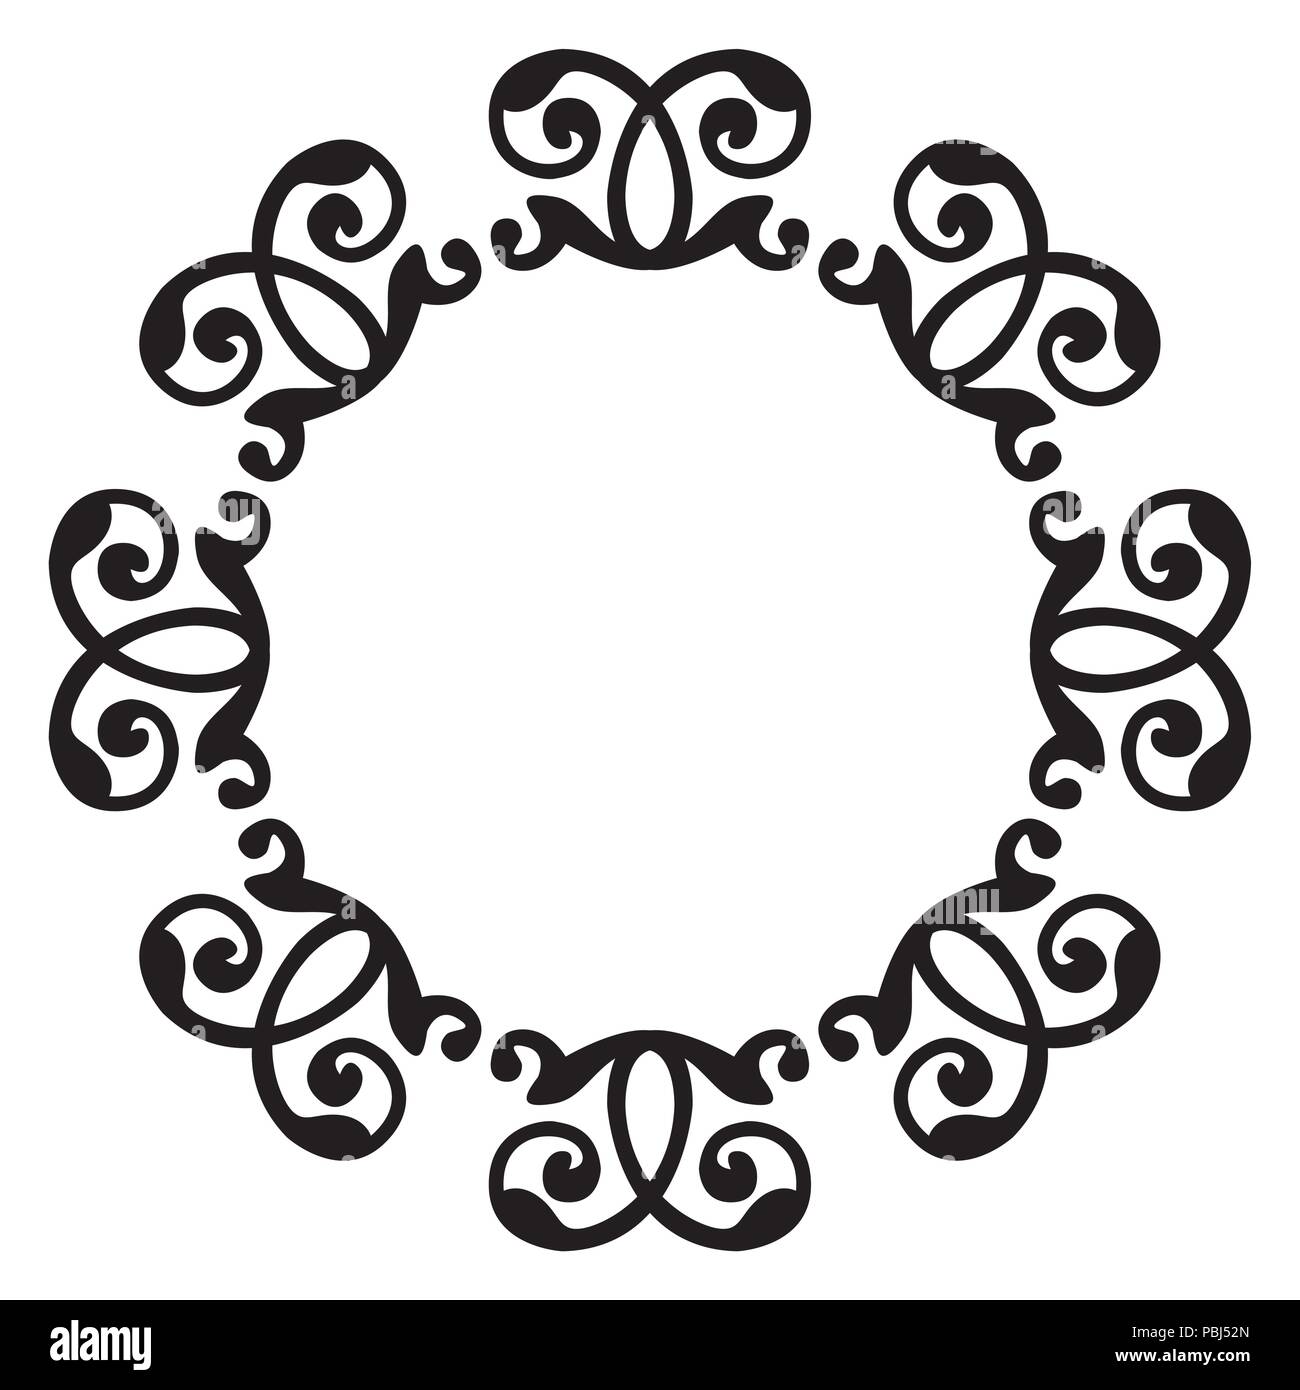 Artistic black and white circle frame, oriental style Stock Vector